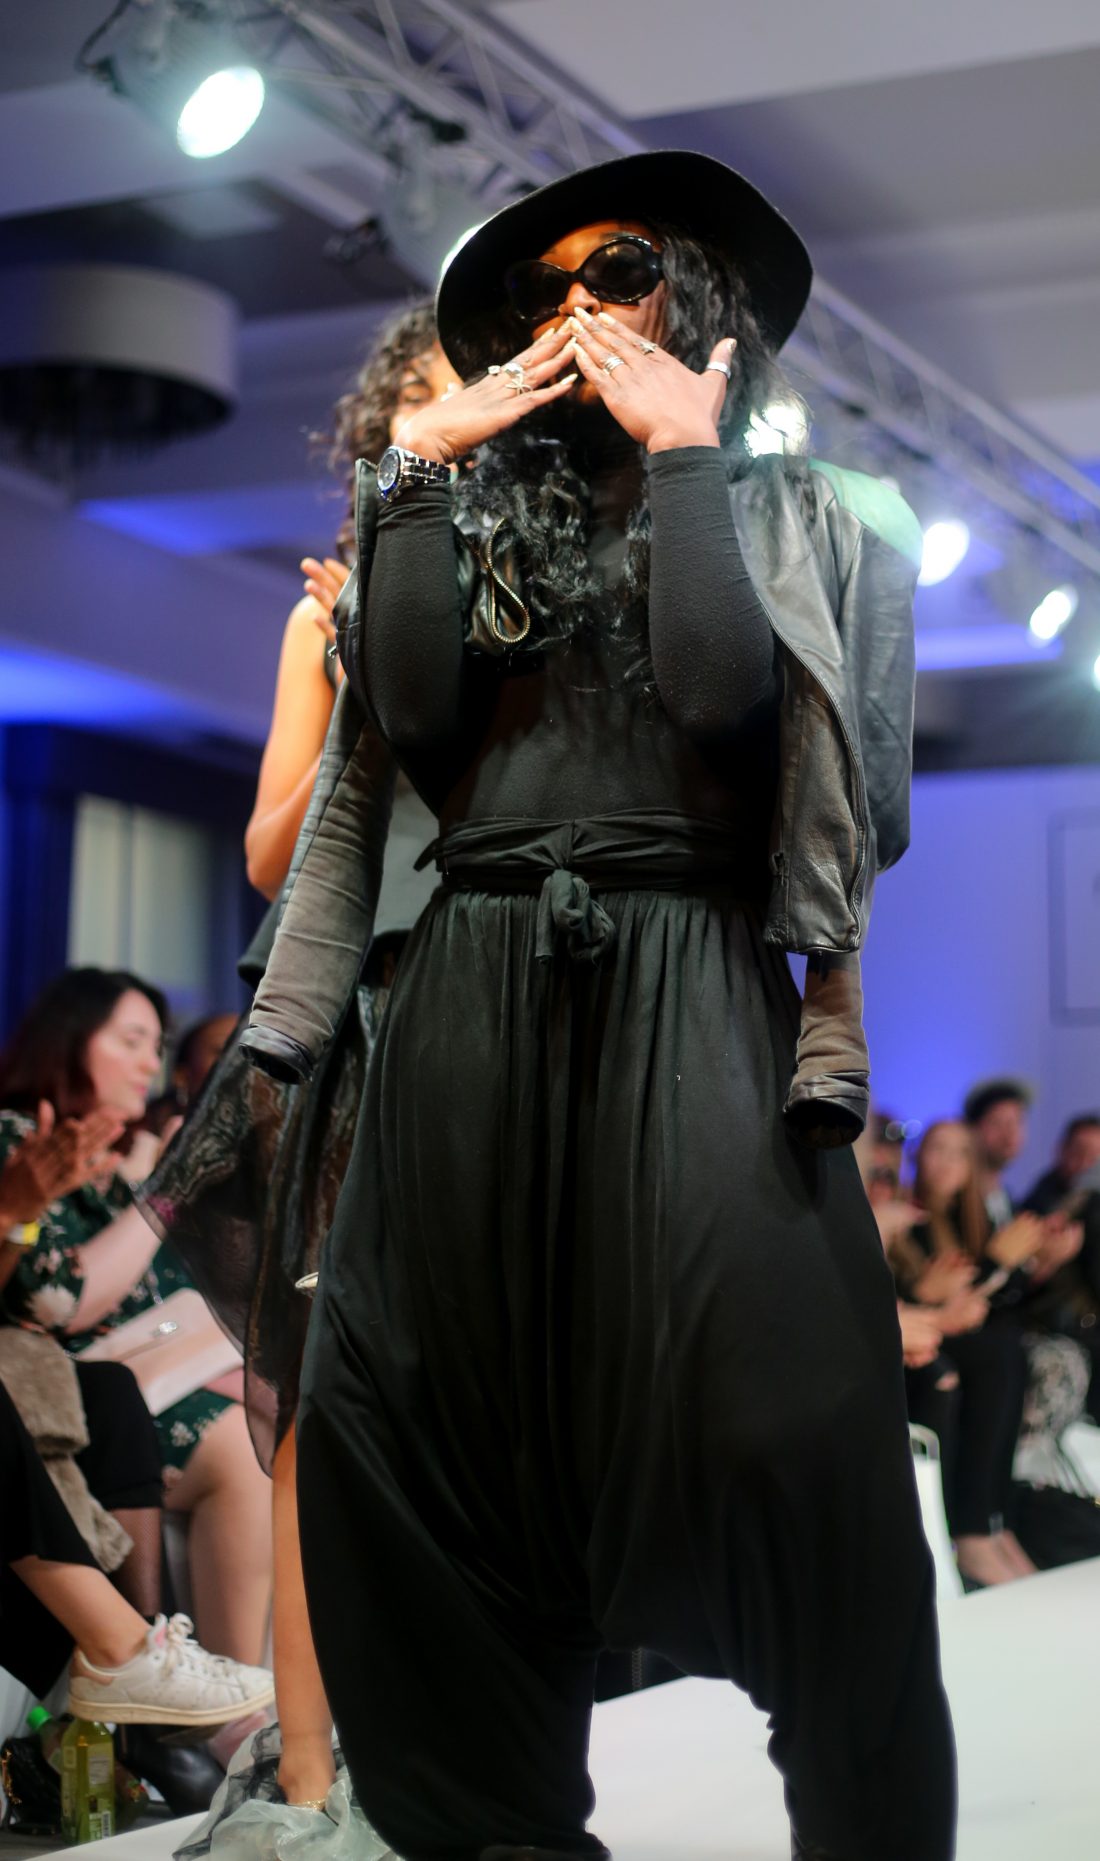 Fashions Finest turn up for annual celebration of emerging designers